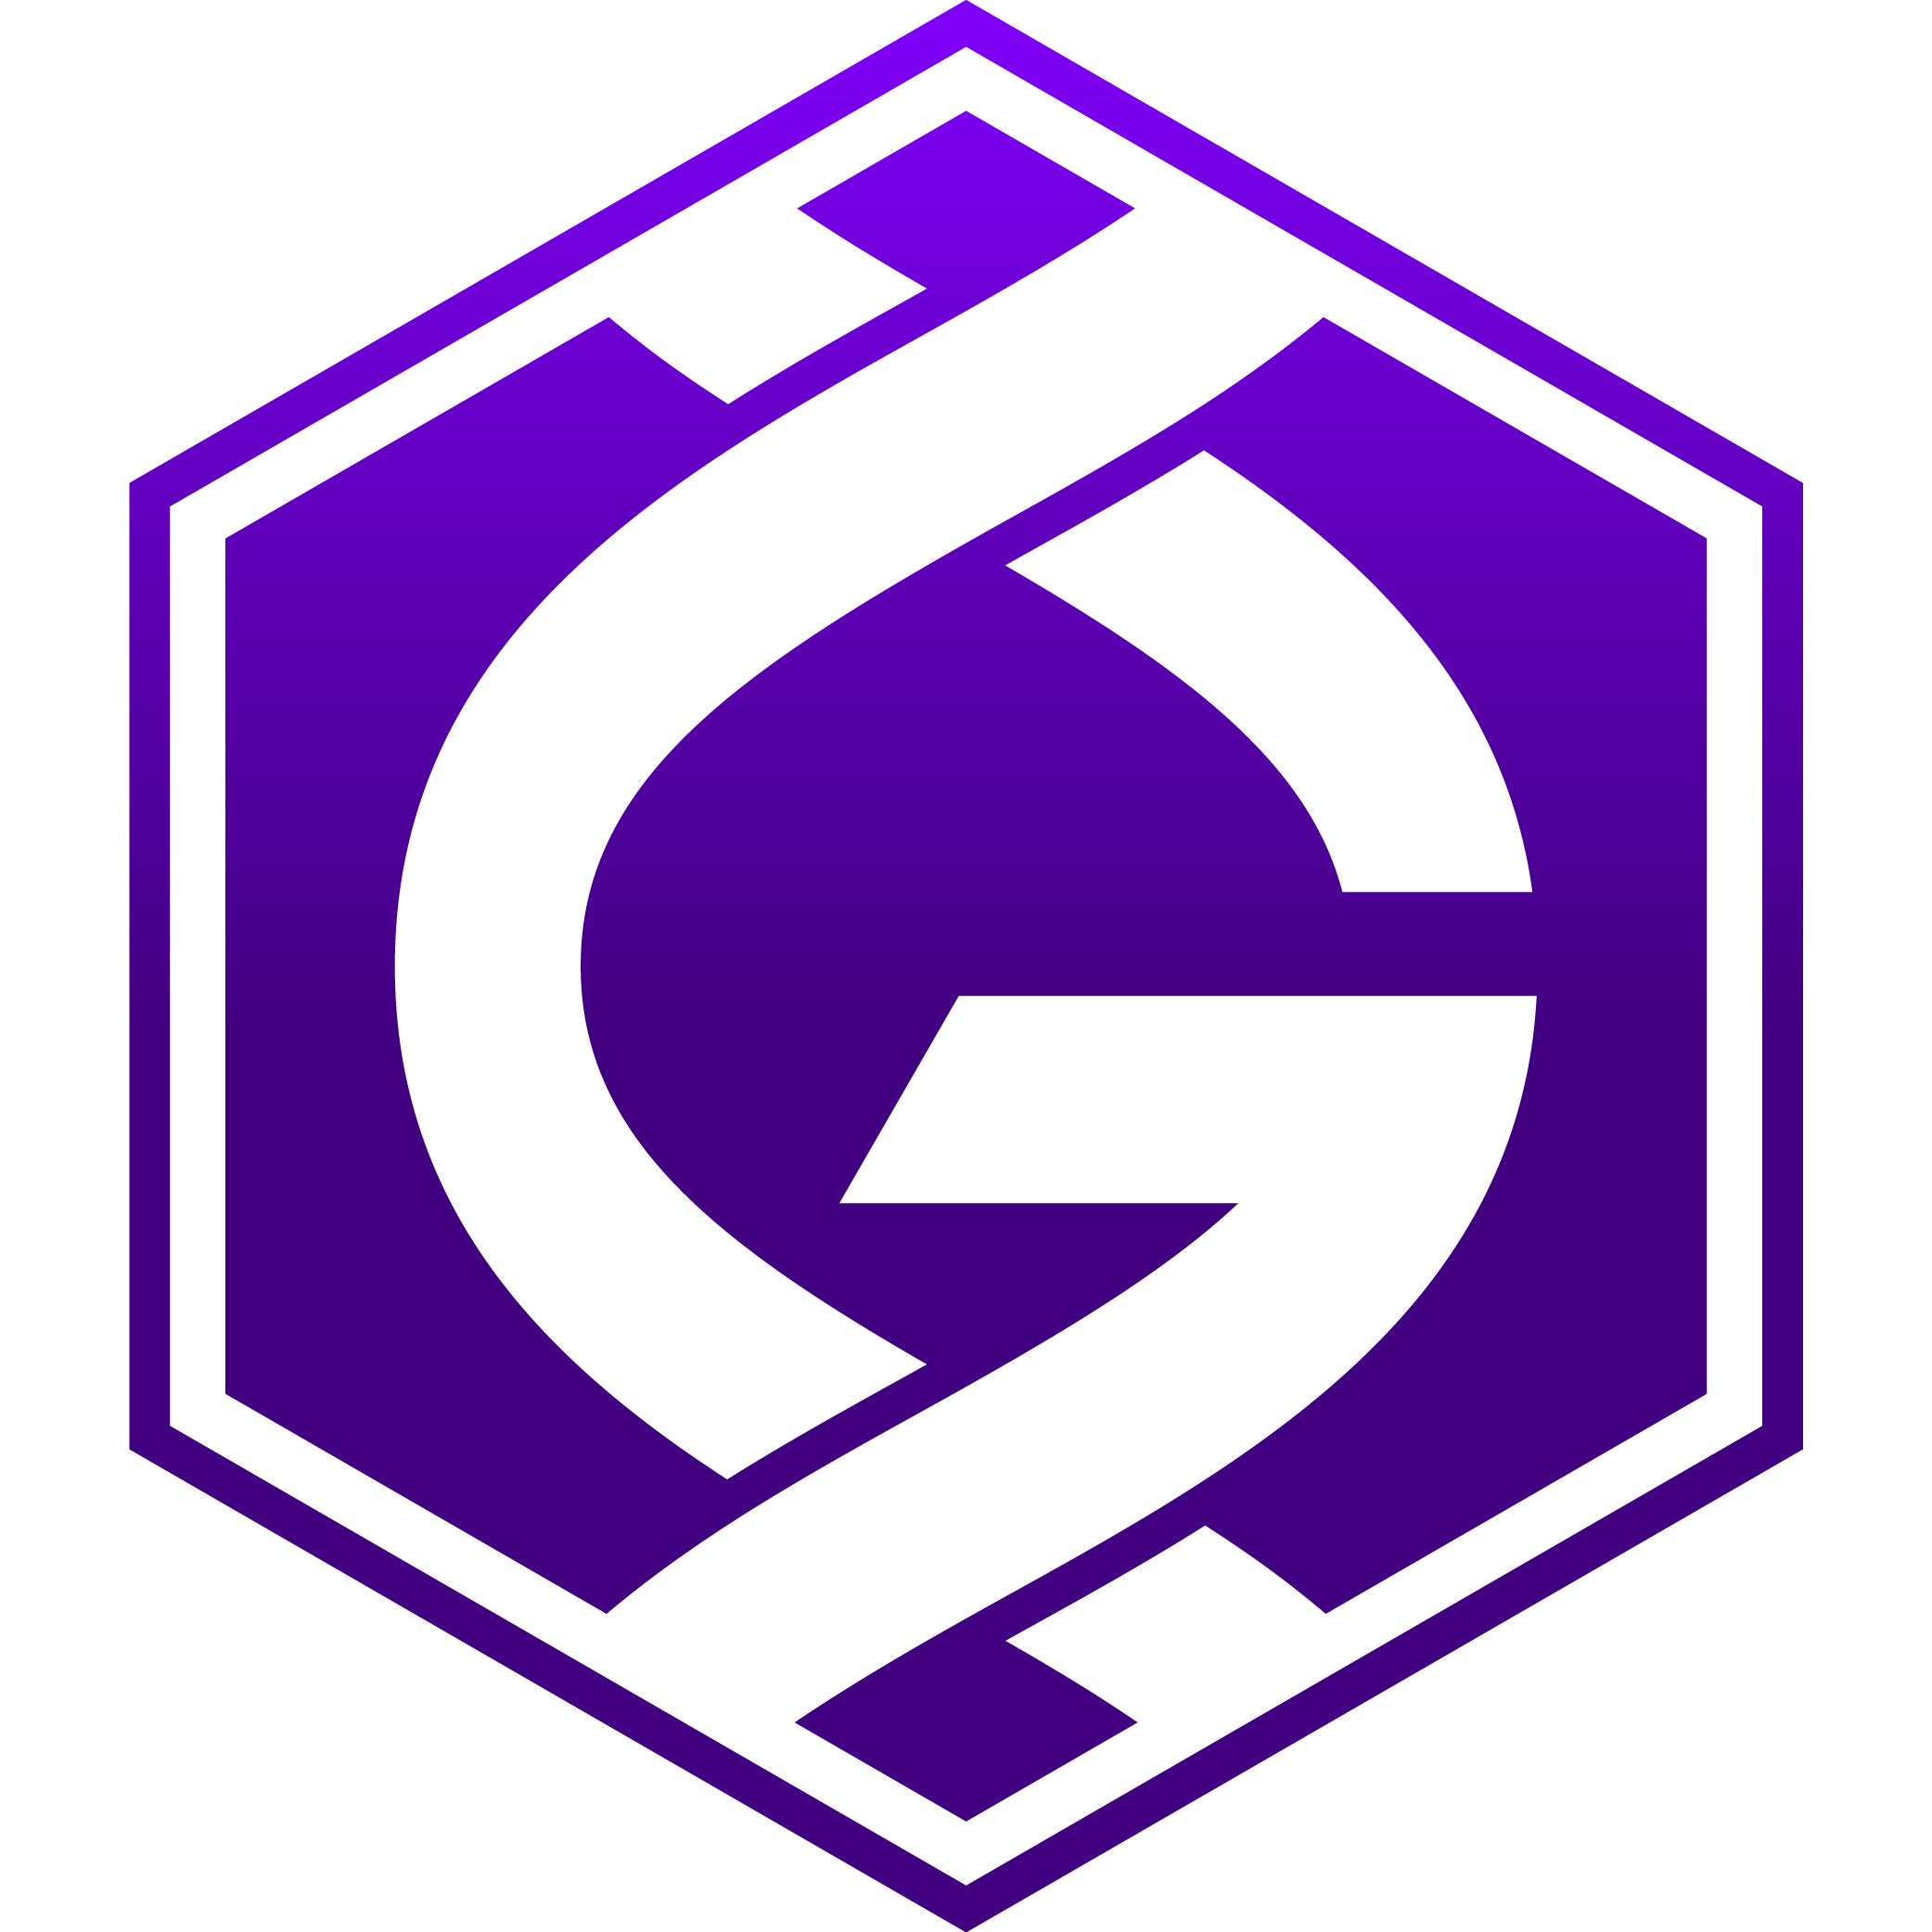 GRCLogoOnly_Purple&White_Solid.png